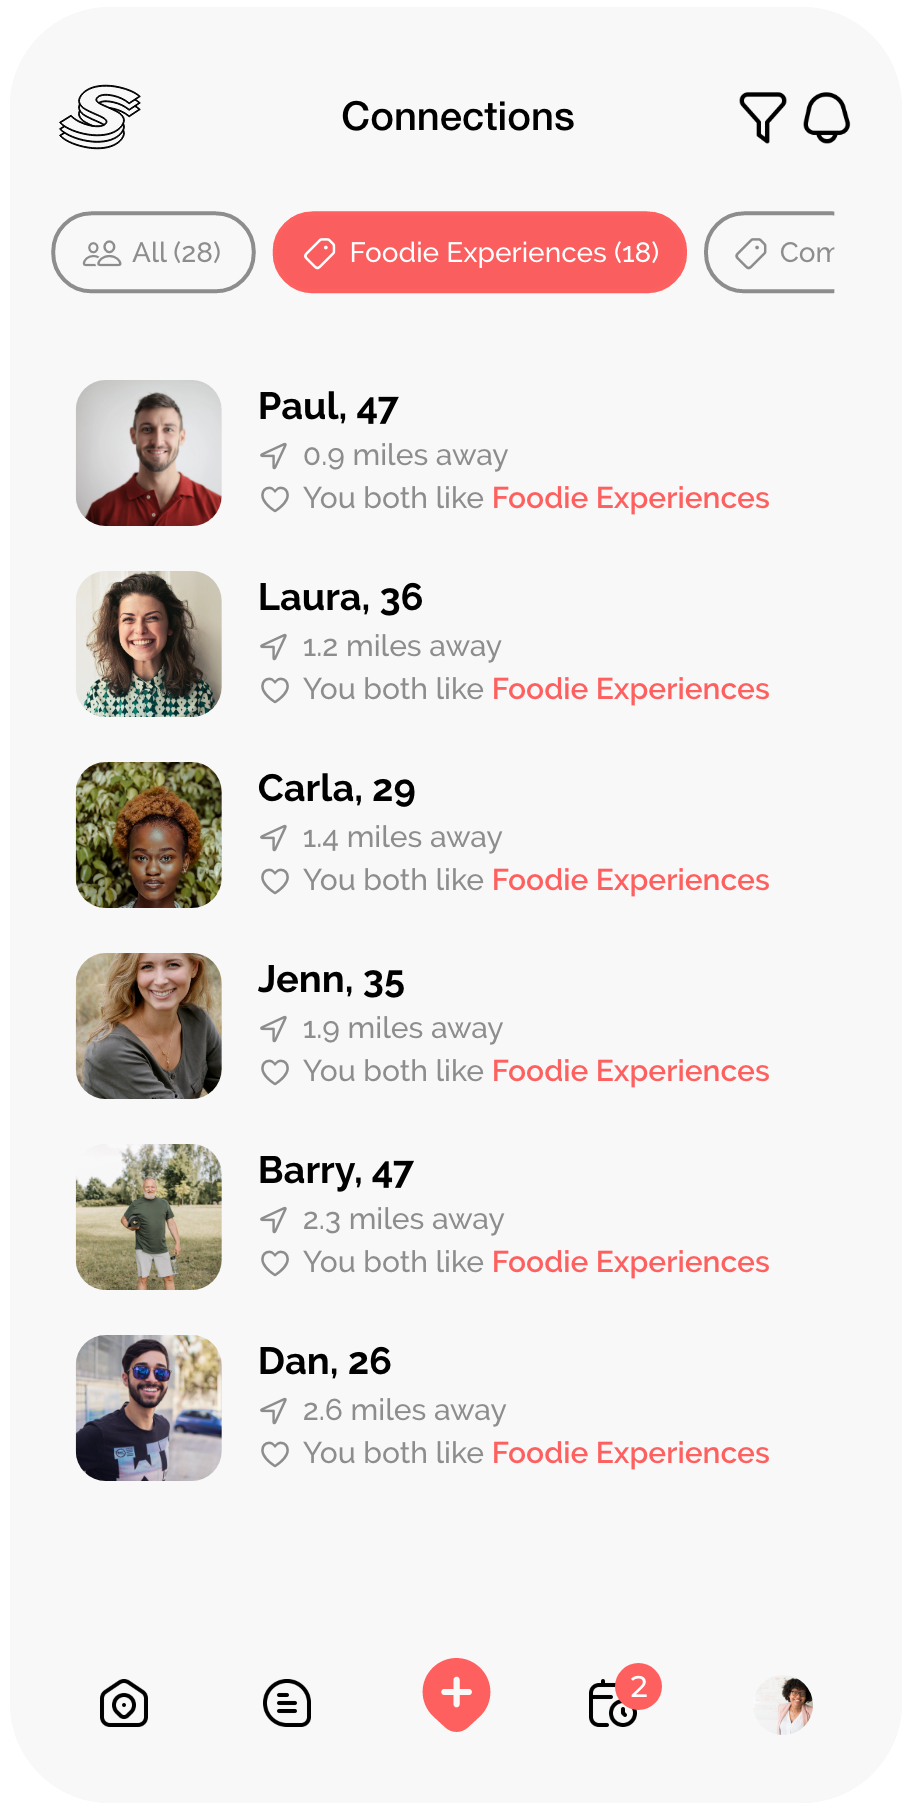 Socially Friendship App Connections